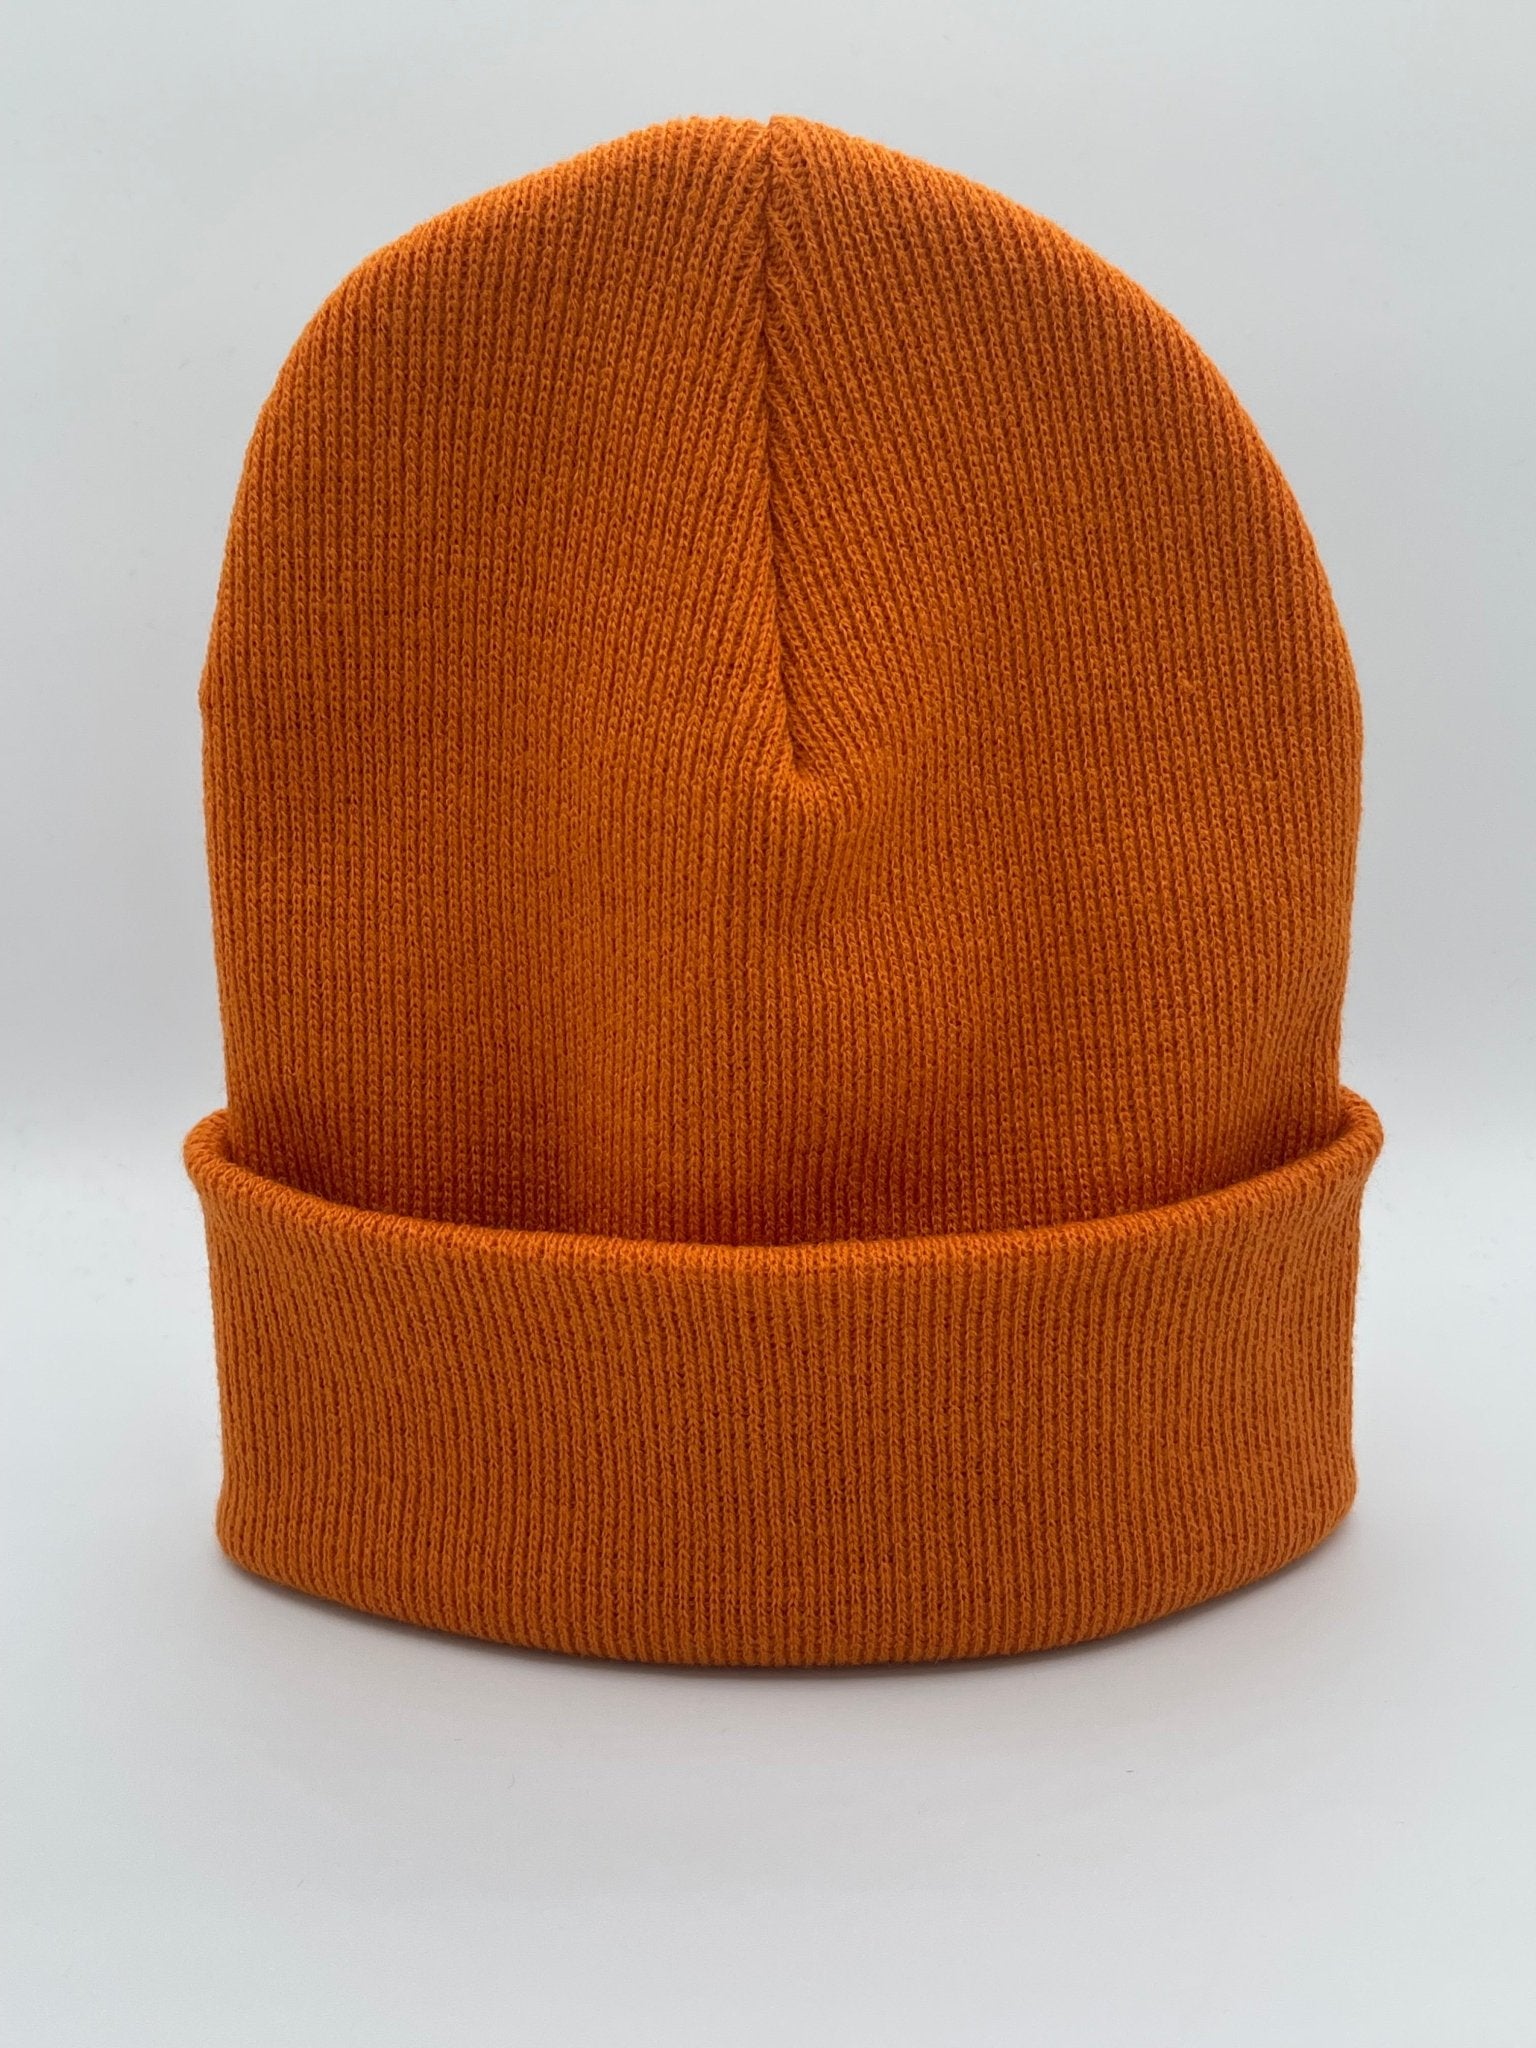 Blank Beanie Factory Cuffed Winter Hat, Wholesale price, Premium Quality, Orange, Made in U.S.A - The Beanie Factory